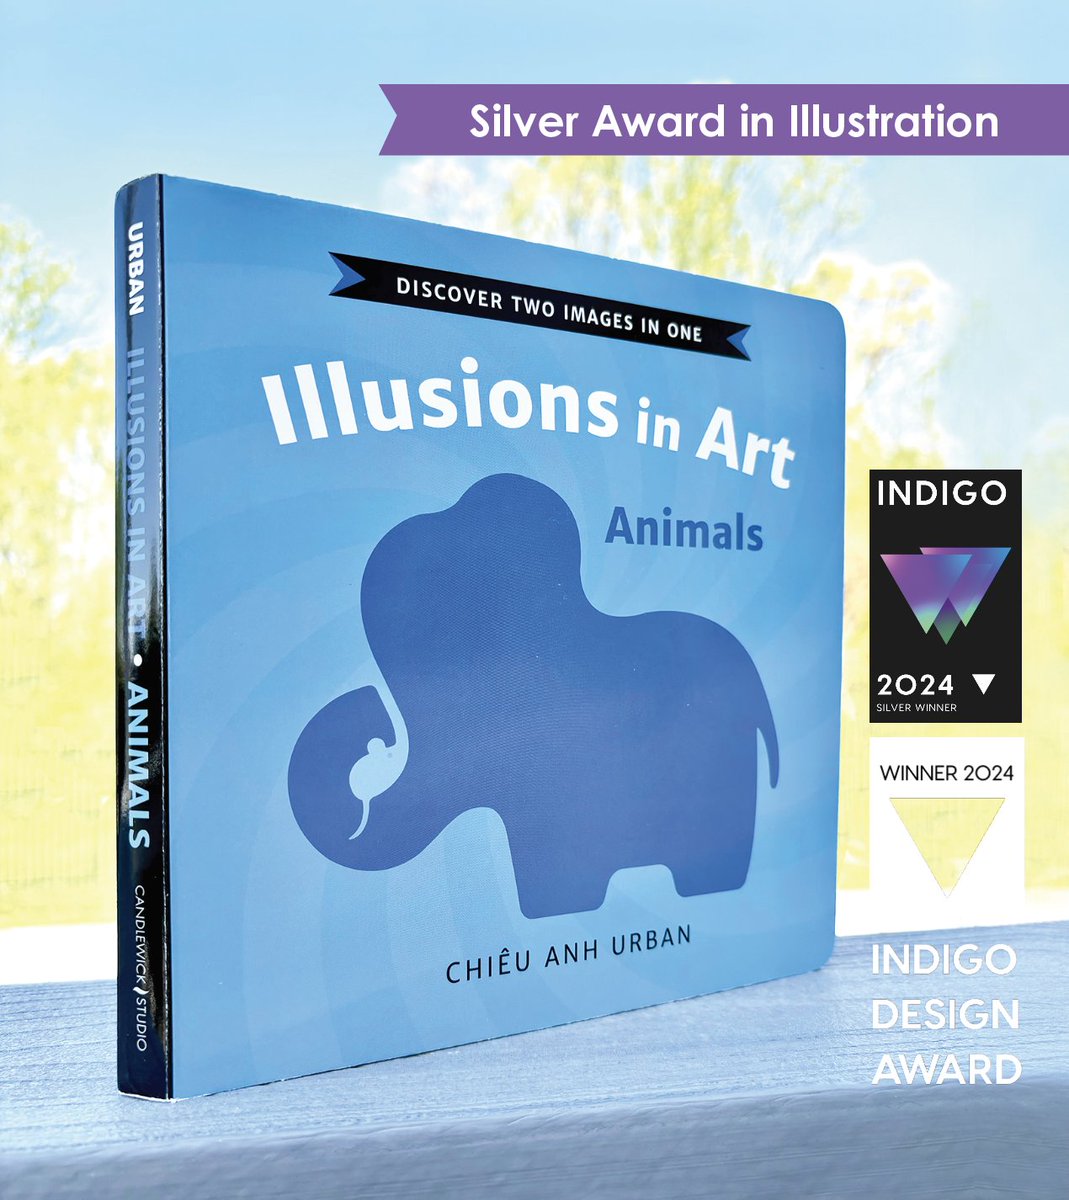 Congrats to 'Illusions in Art: Animals' for being recognized with a Silver Indigo Design Award!